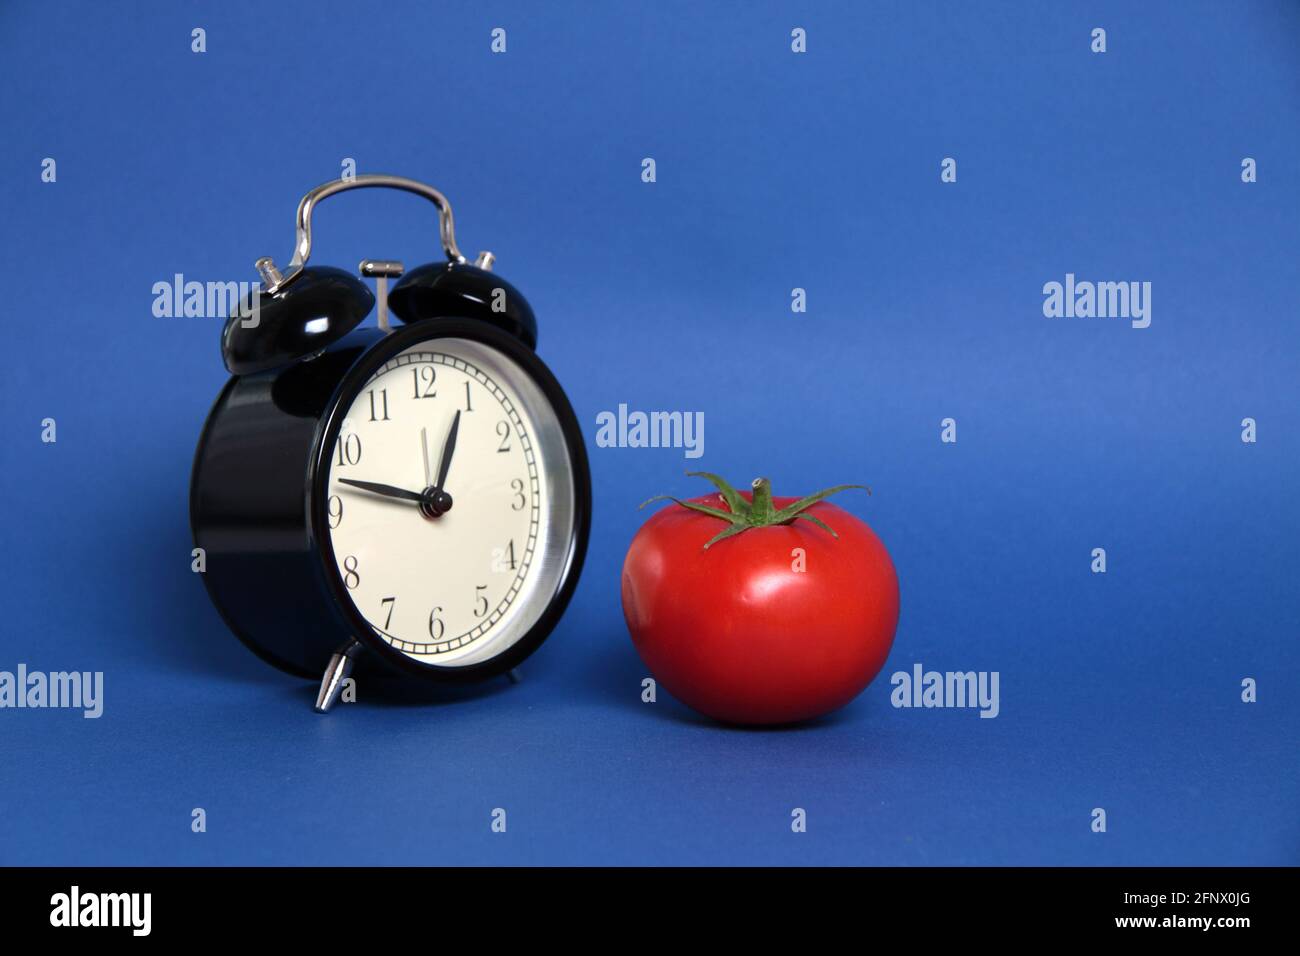 Pomodoro Technique concept - tomato and alarm clock isolated on blue background. Time management techniques Stock Photo